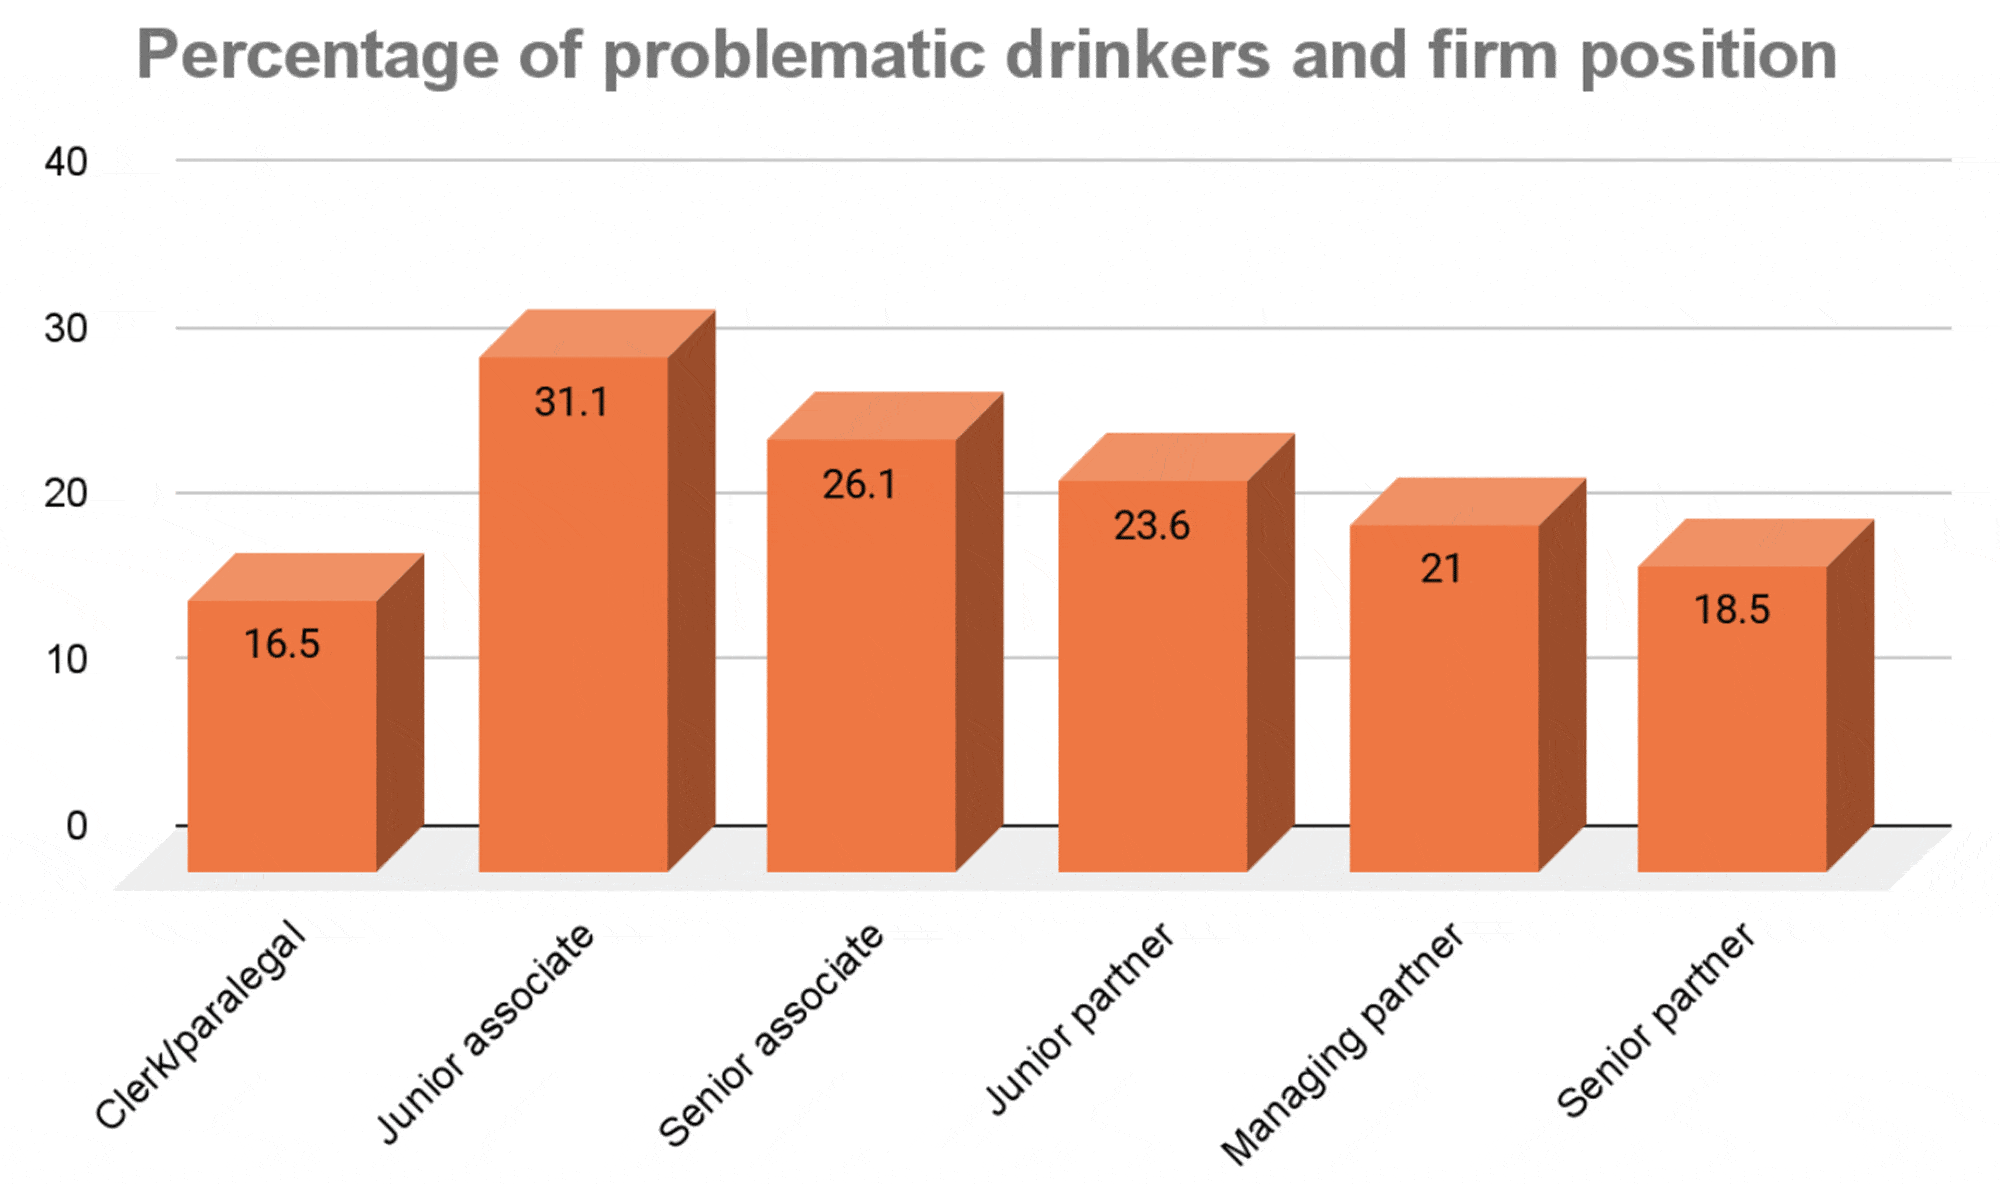 Percentage of problematic drinkers and firm position